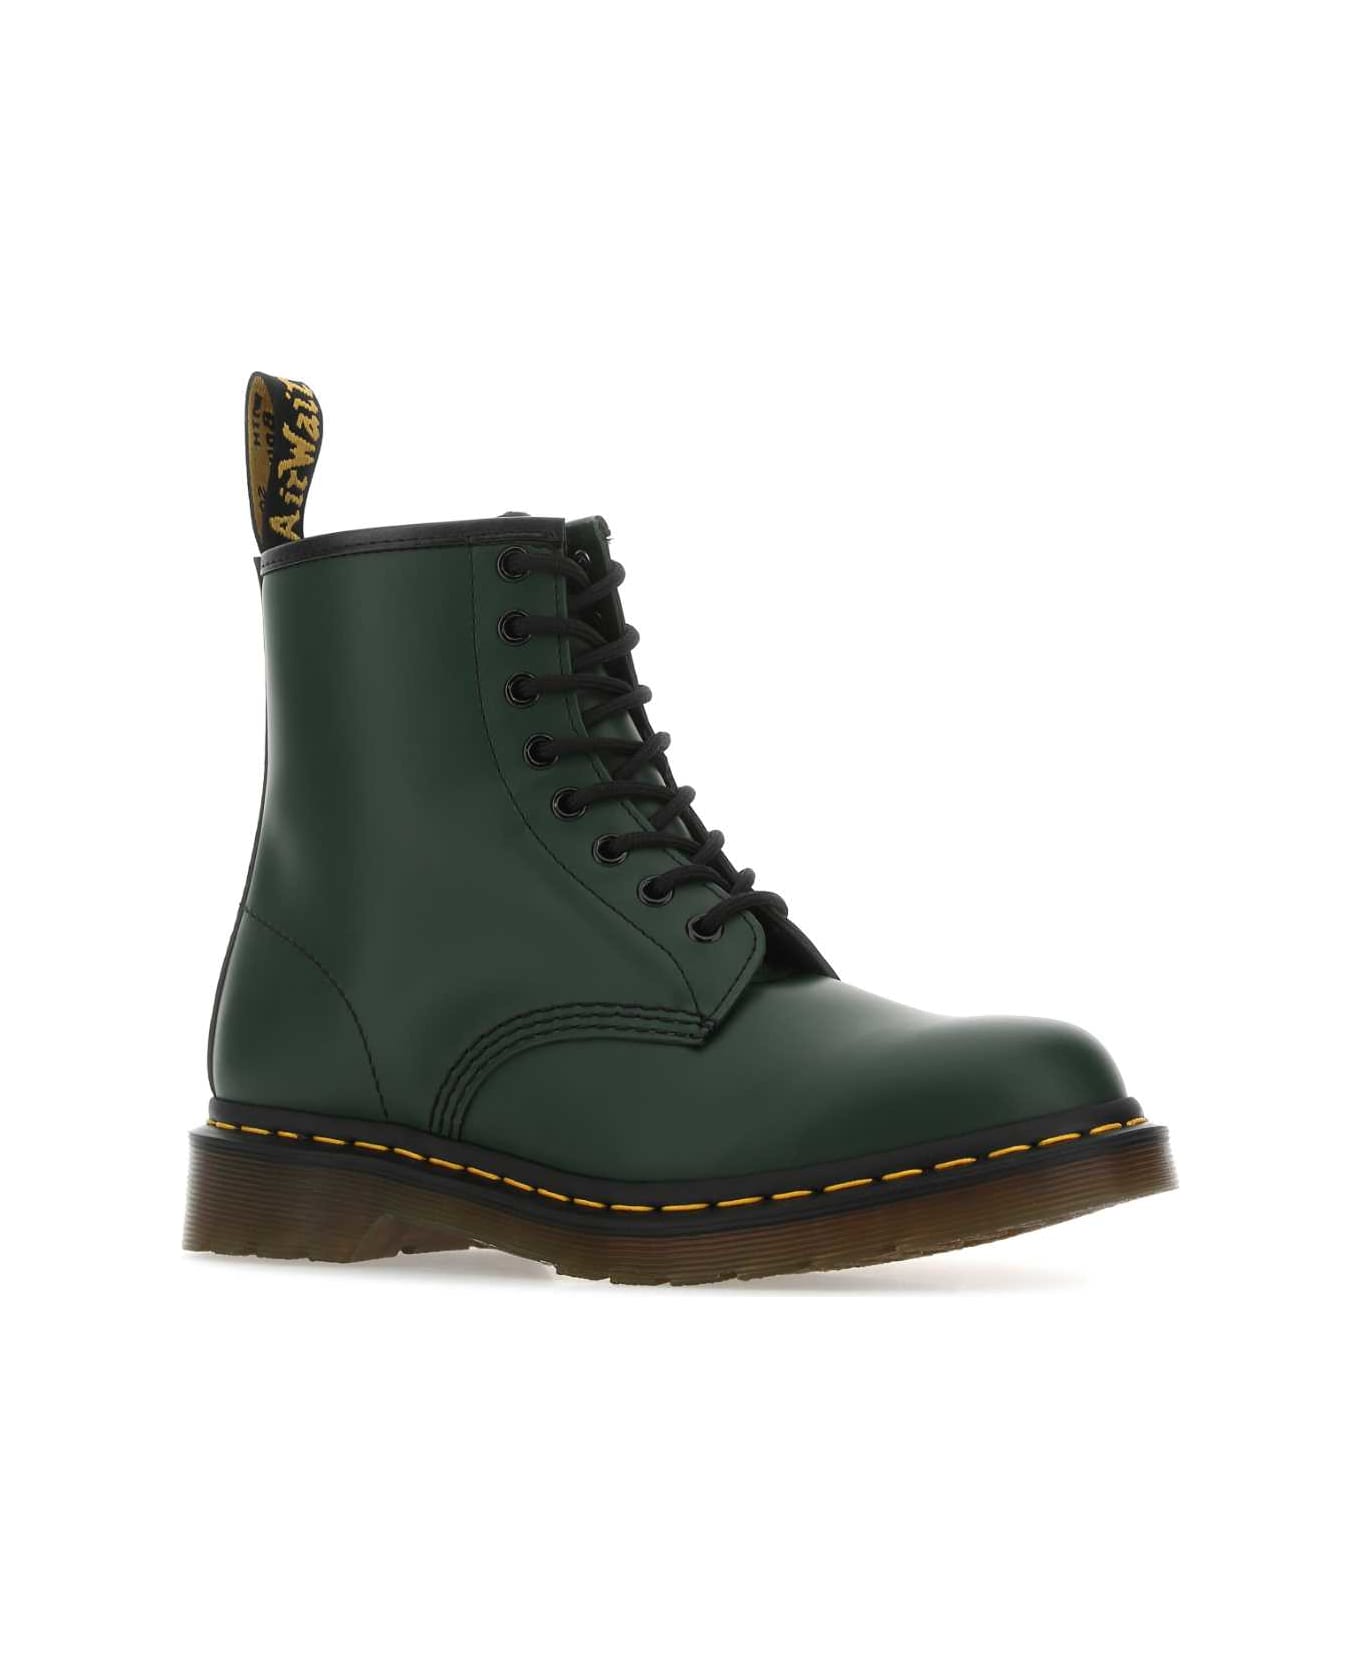 Dr. Martens Bottle Green Leather 1460 Ankle Boots - GreenSmooth